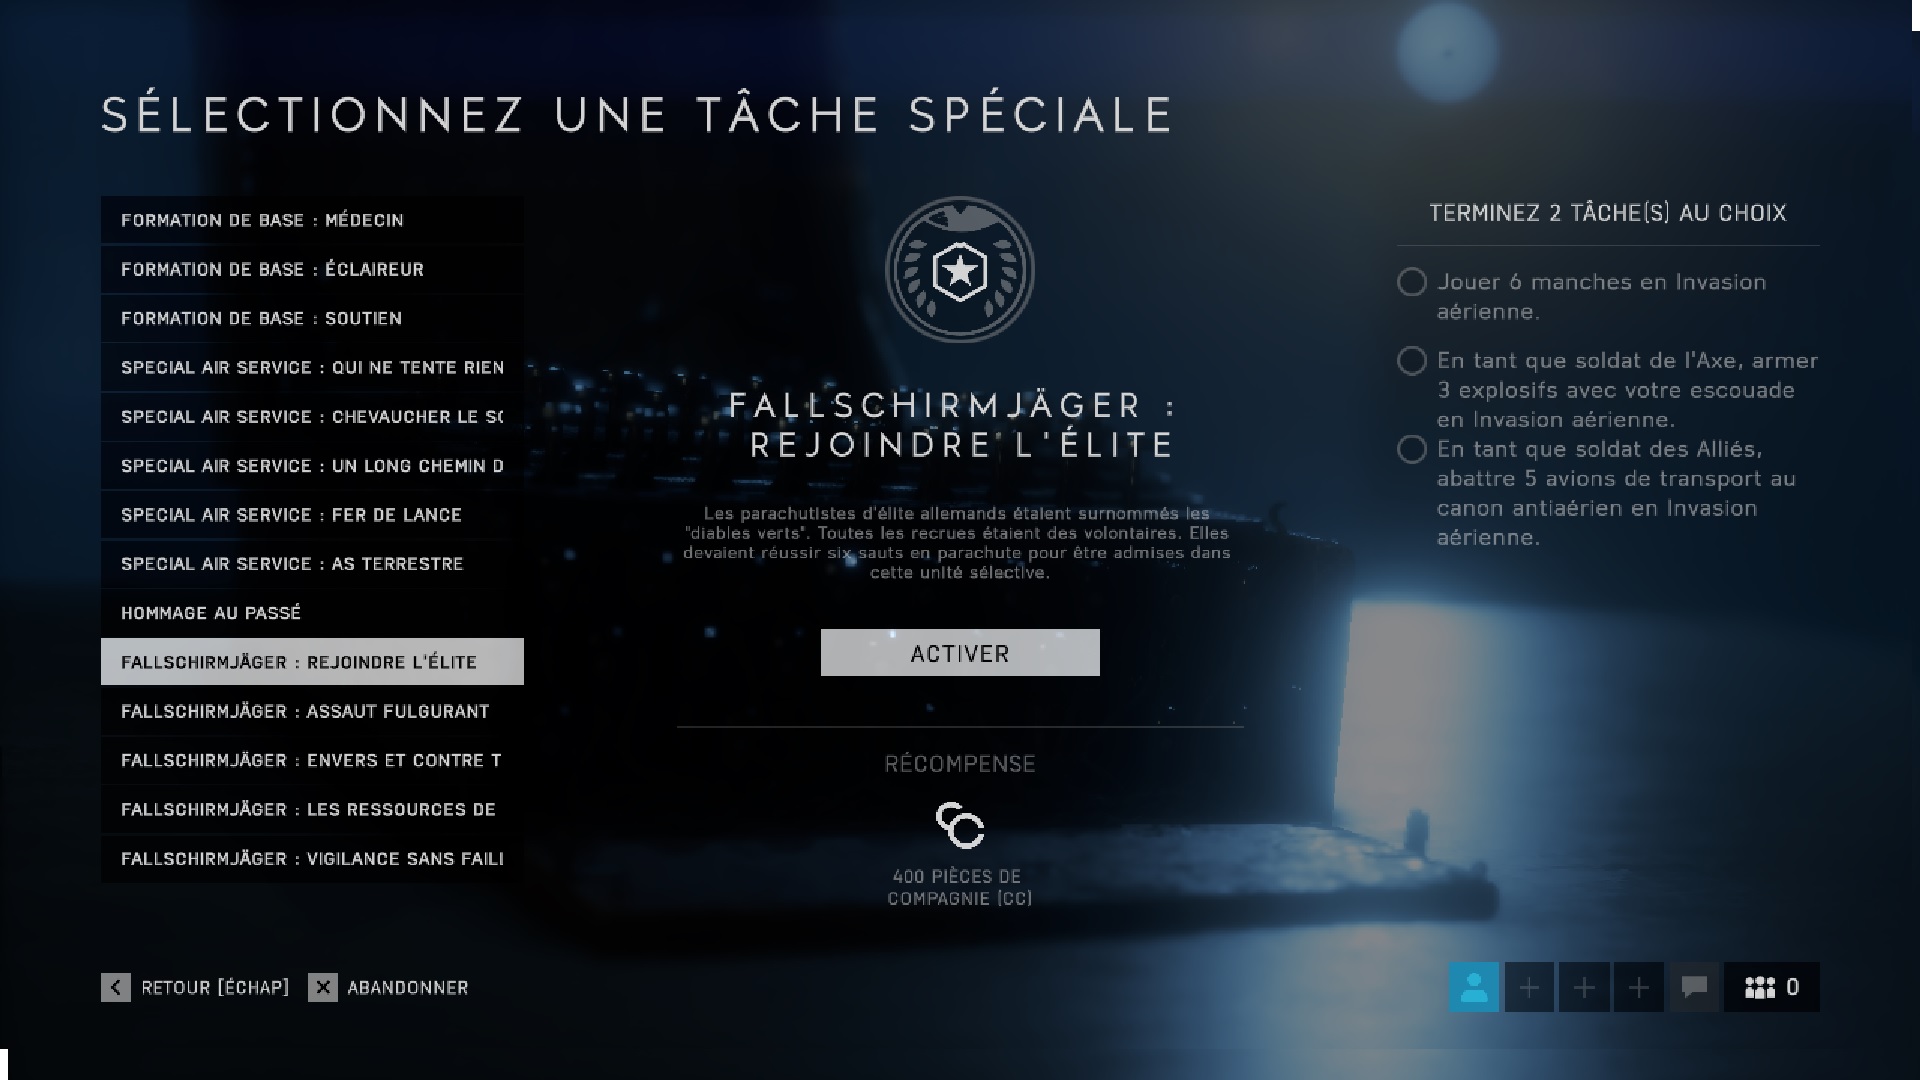 bfv-battlefield-5-credits-cc-piece-compagnie-tache-speciale--defis-gagner-comment-skin-arme